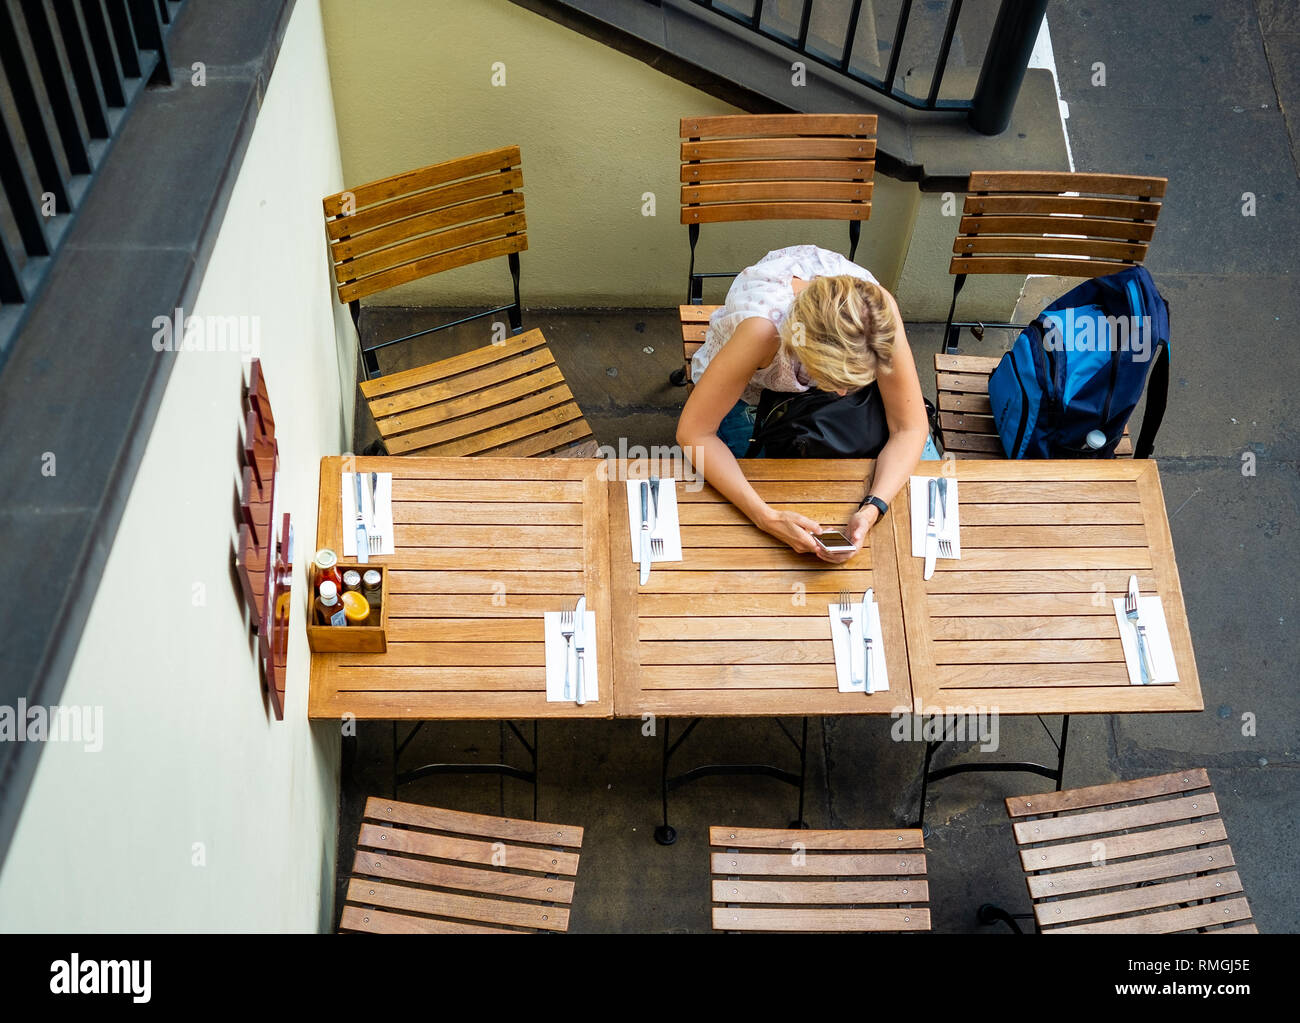 London, England - 2 June 2018: Looking down towards a young lady checking a mobile phone at a restaurant table. Stock Photo